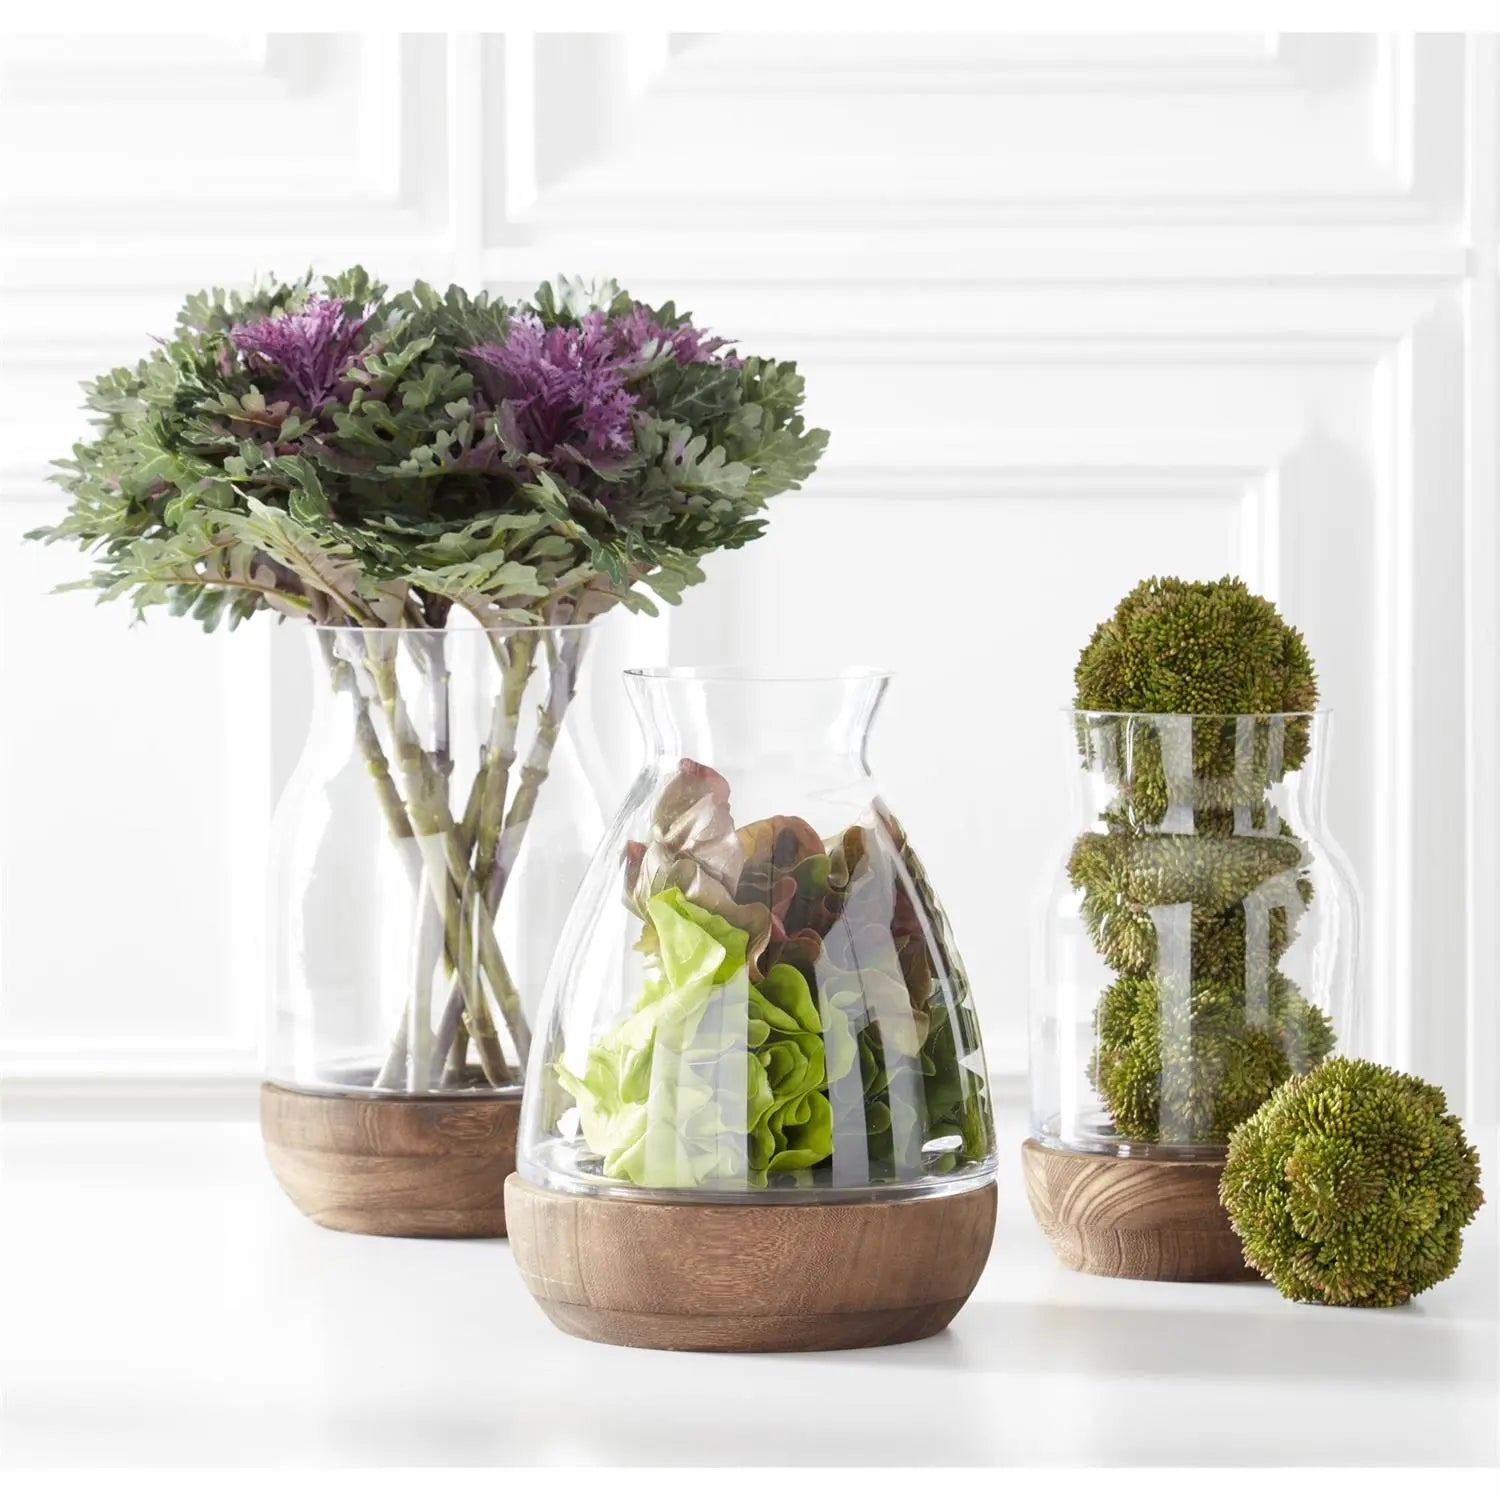 K and K Interiors Dark Green Sedum Ball stacked in a clear glass and one laid on the floor. Set next to other floral items